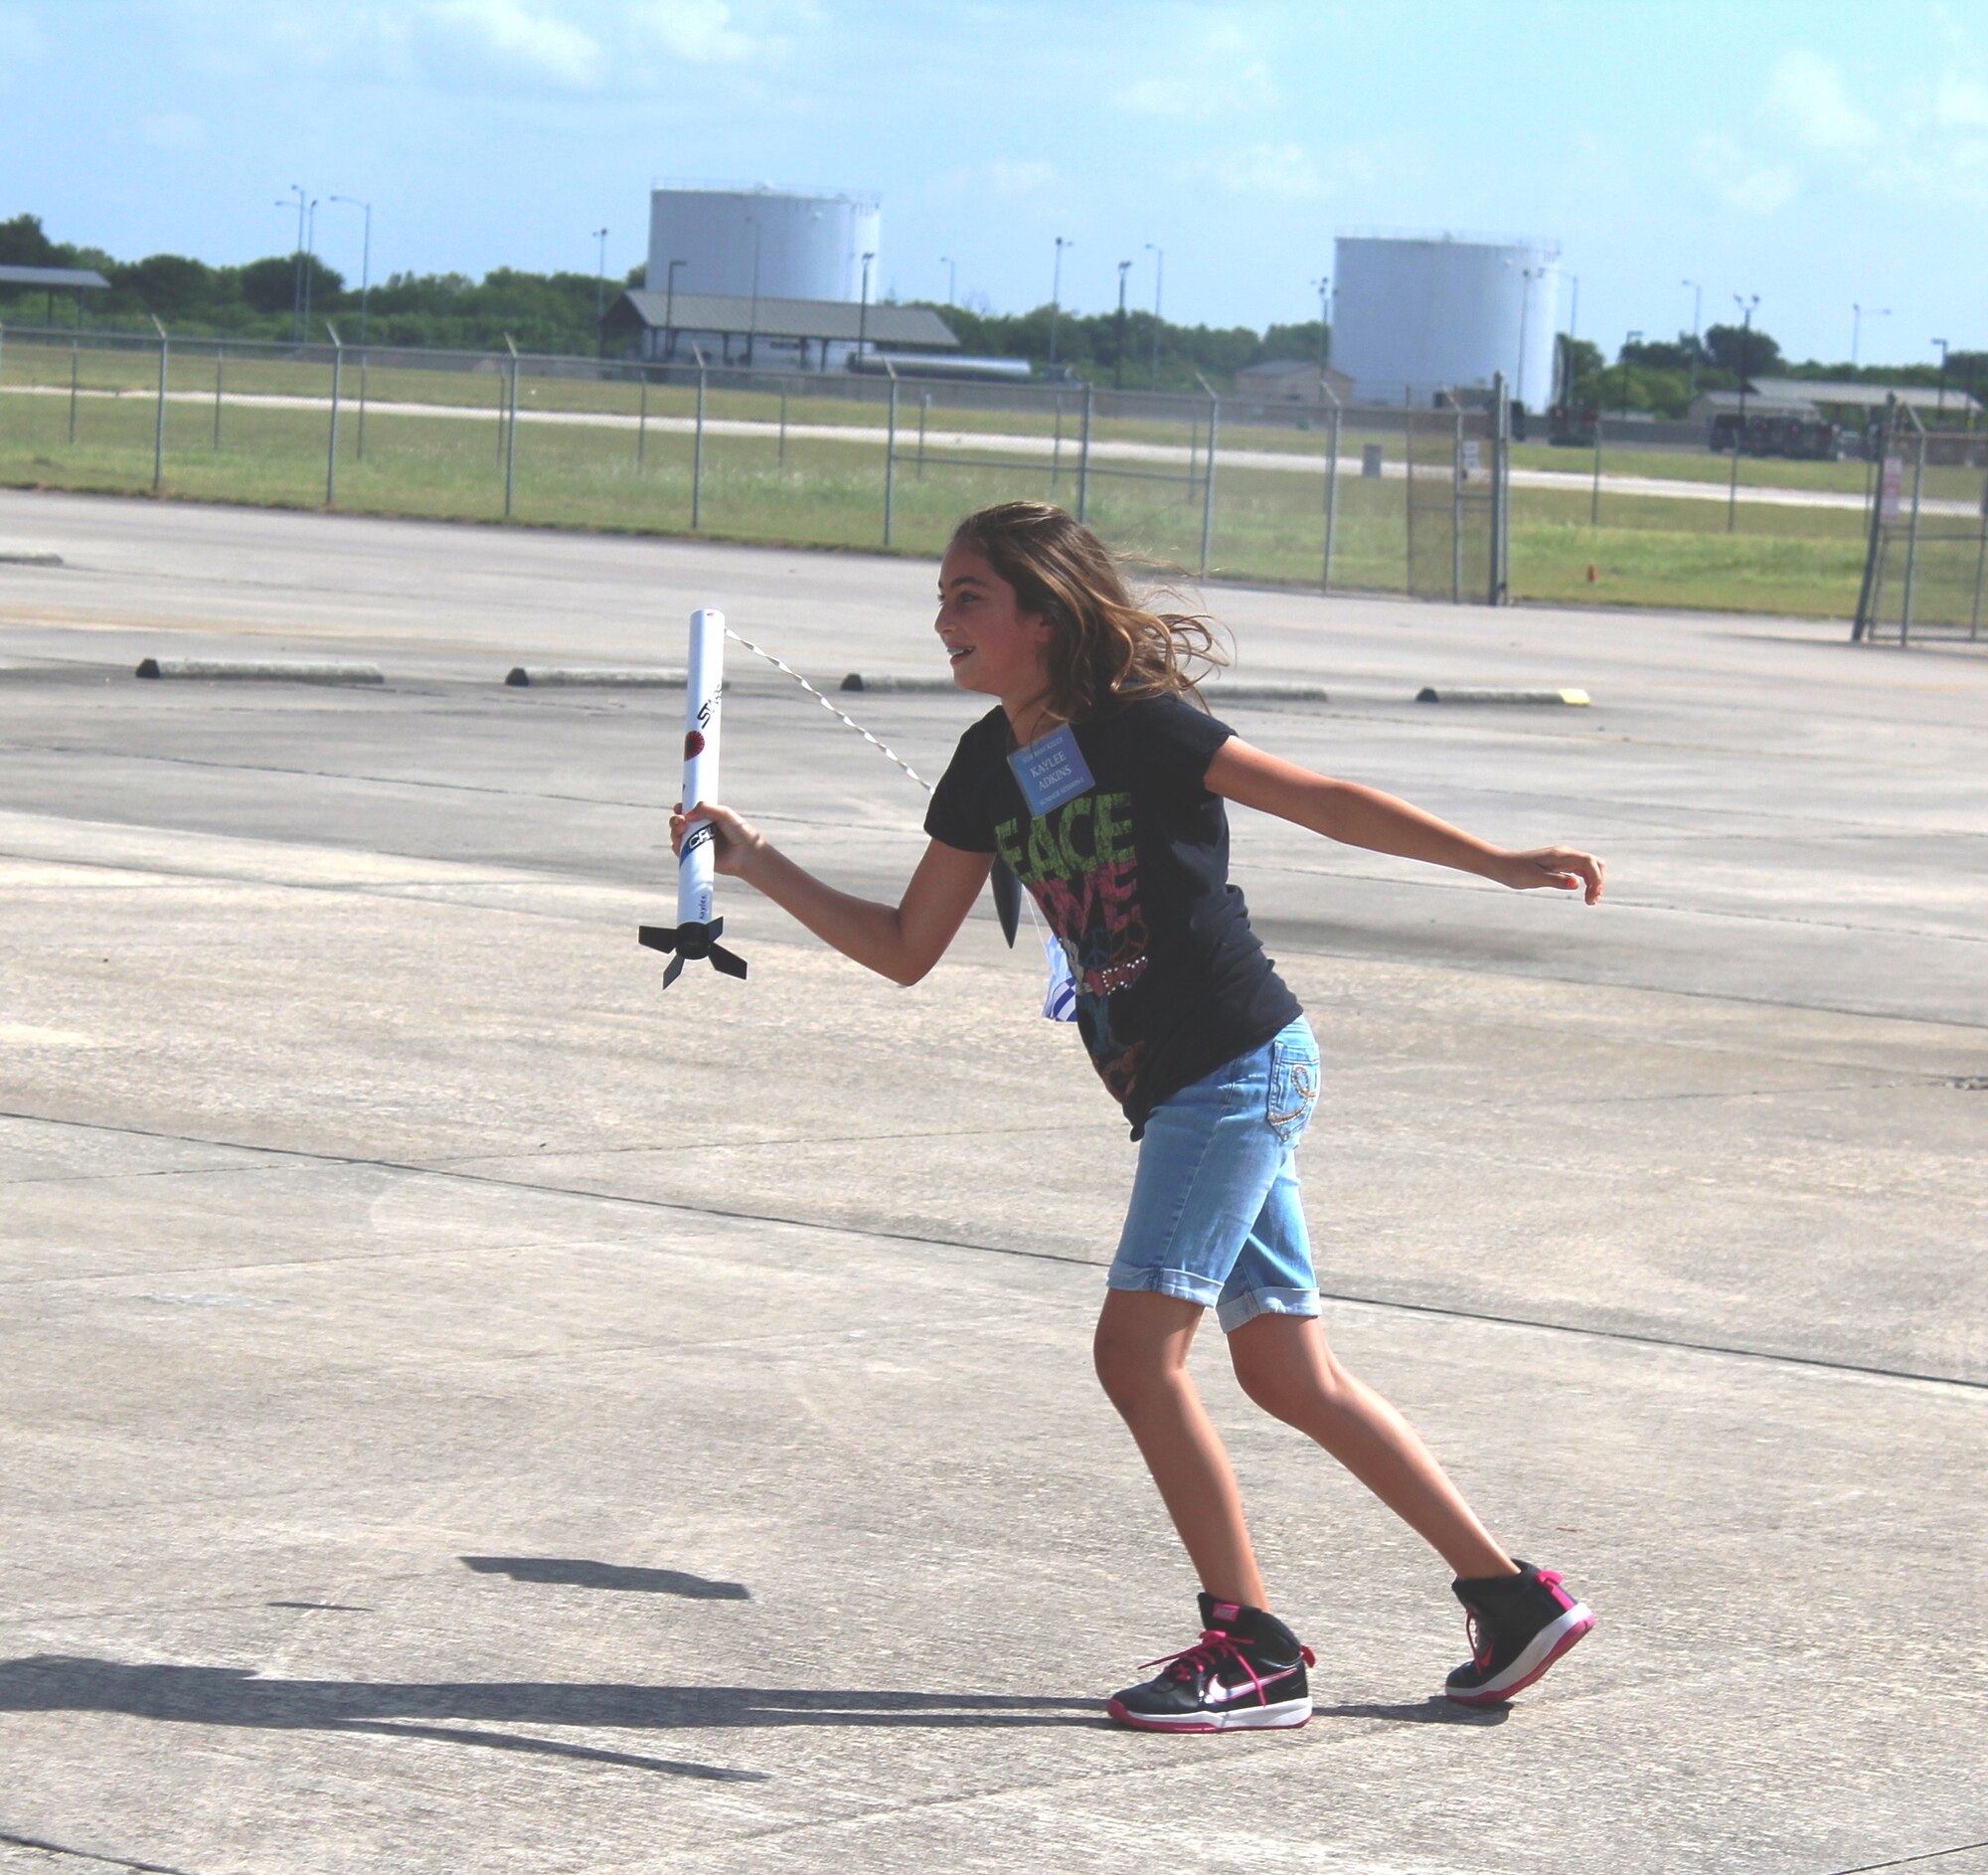 Kayla Adkins, daughter of Master Sgt. Helen Adkins, a training and logistics readiness manager at the 149th Fighter Training Wing, catches her model rocket after a successful launch on the final morning of her week-long class at DoD STARBASE-Kellyat Joint Base San Antonio-Lackland, Texas on July 17, 2015. Kayla, along with 19 other students, successfully launched her rocket later on that morning. (U.S. Air Force photo/Tech. Sgt. Carlos J. Trevino) 
